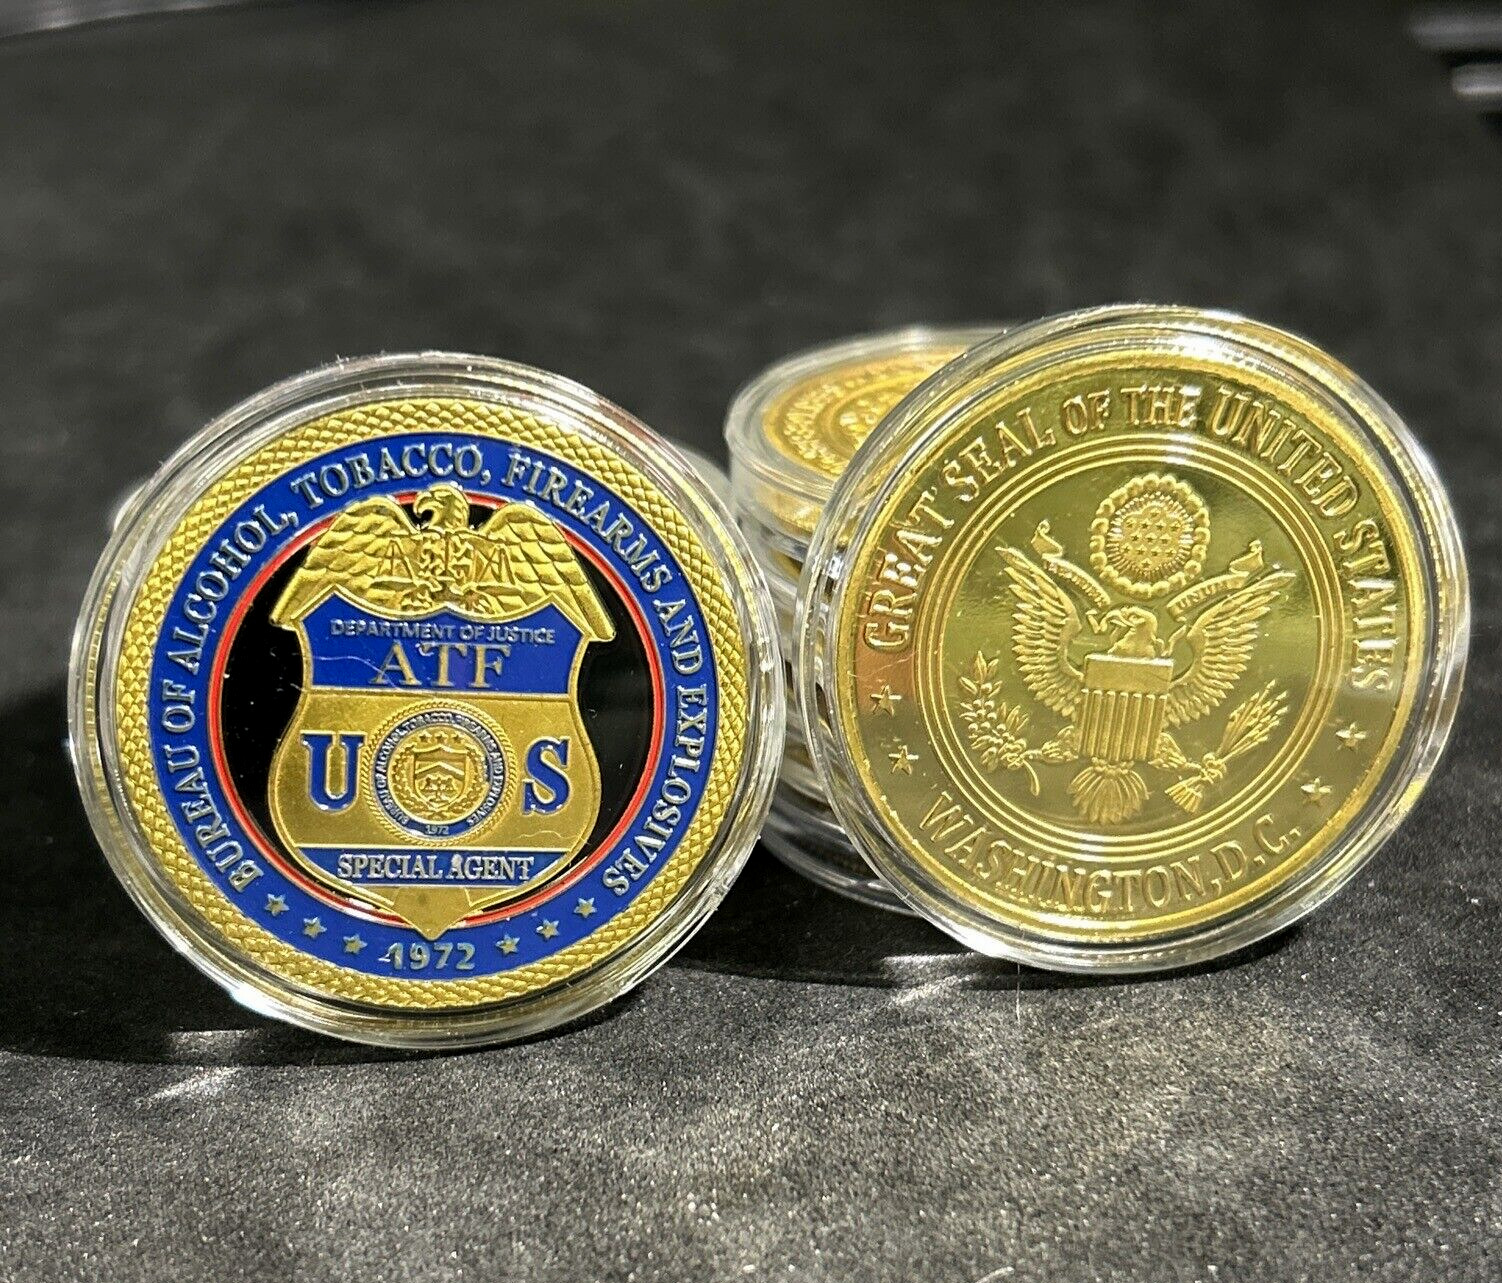 ATF BUREAU OF ALCOHOL TOBACCO & FIREARMS Challenge Coin New